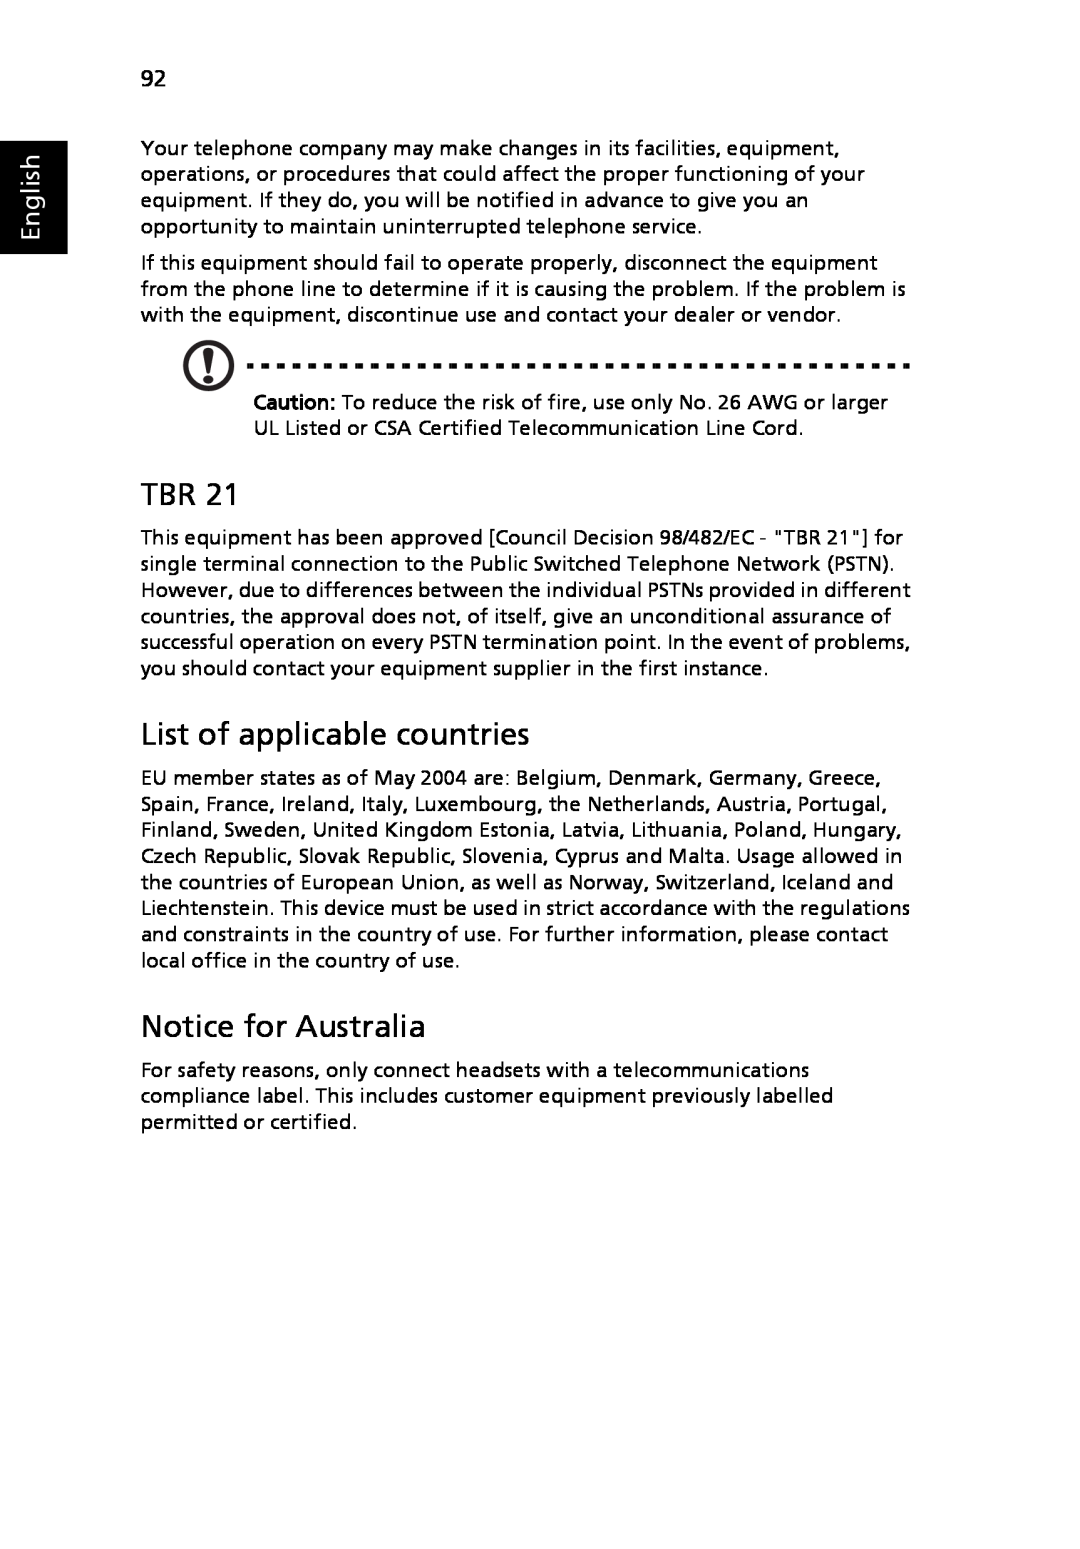 Acer 9120 manual List of applicable countries, Notice for Australia, English 